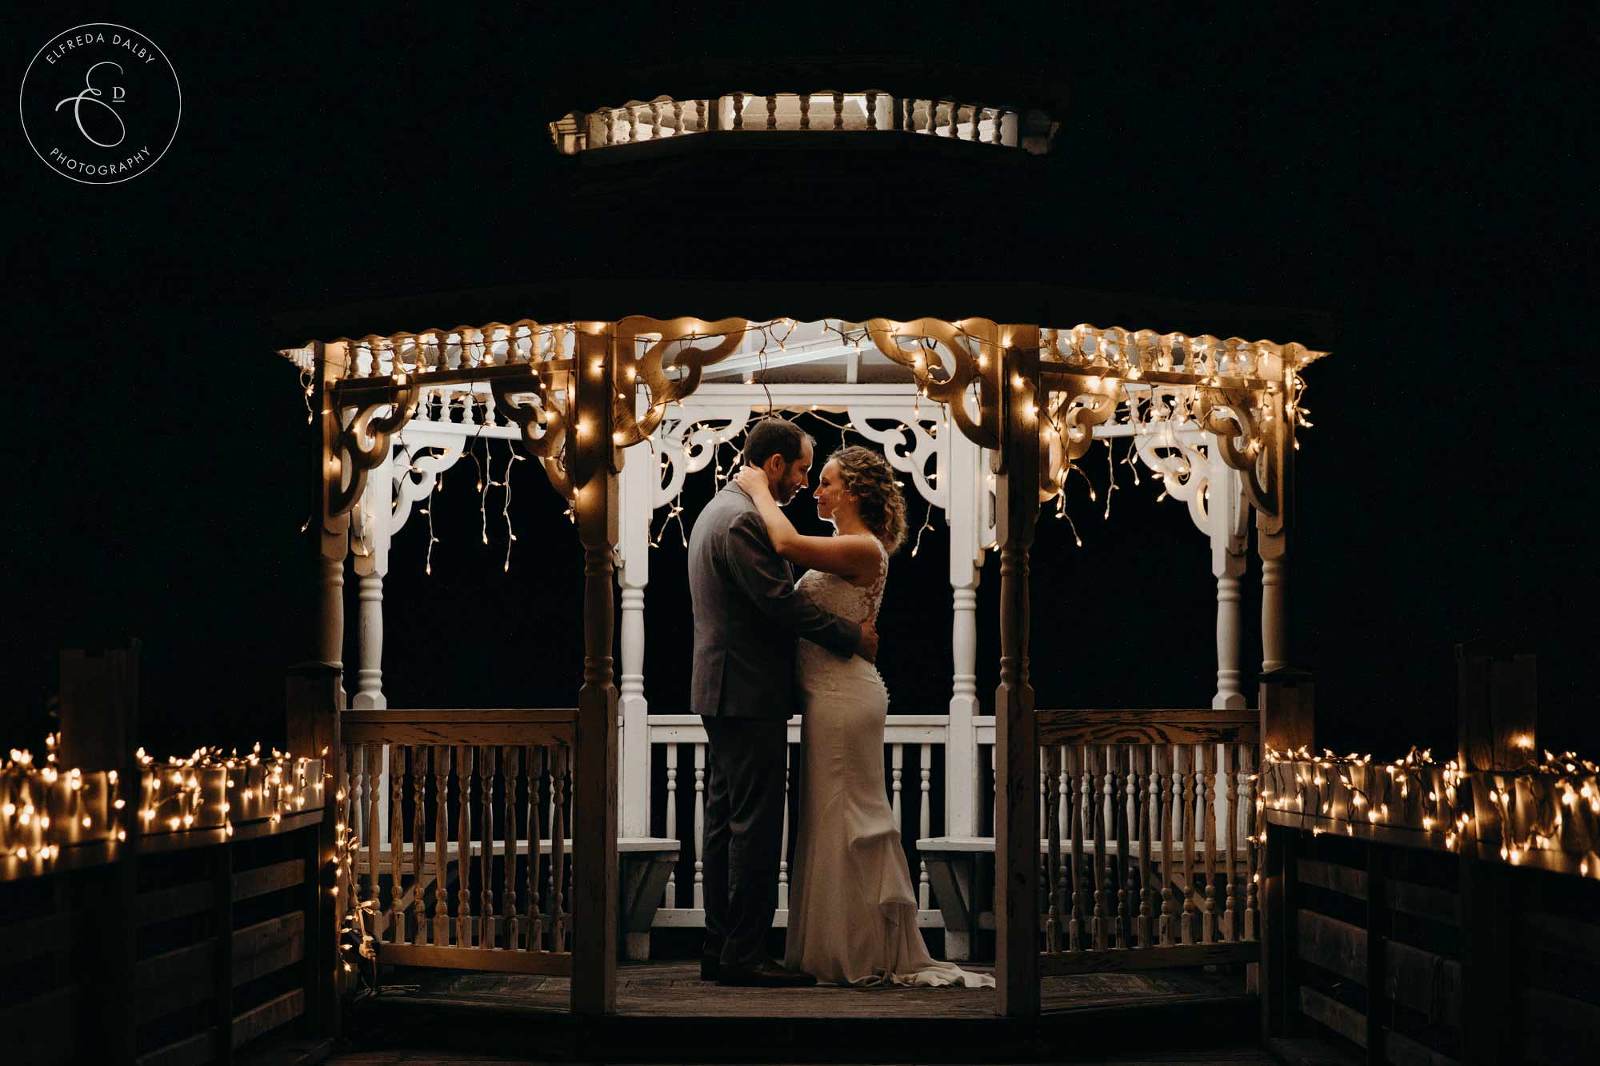 Wedding couple standing in a lit up gazebo